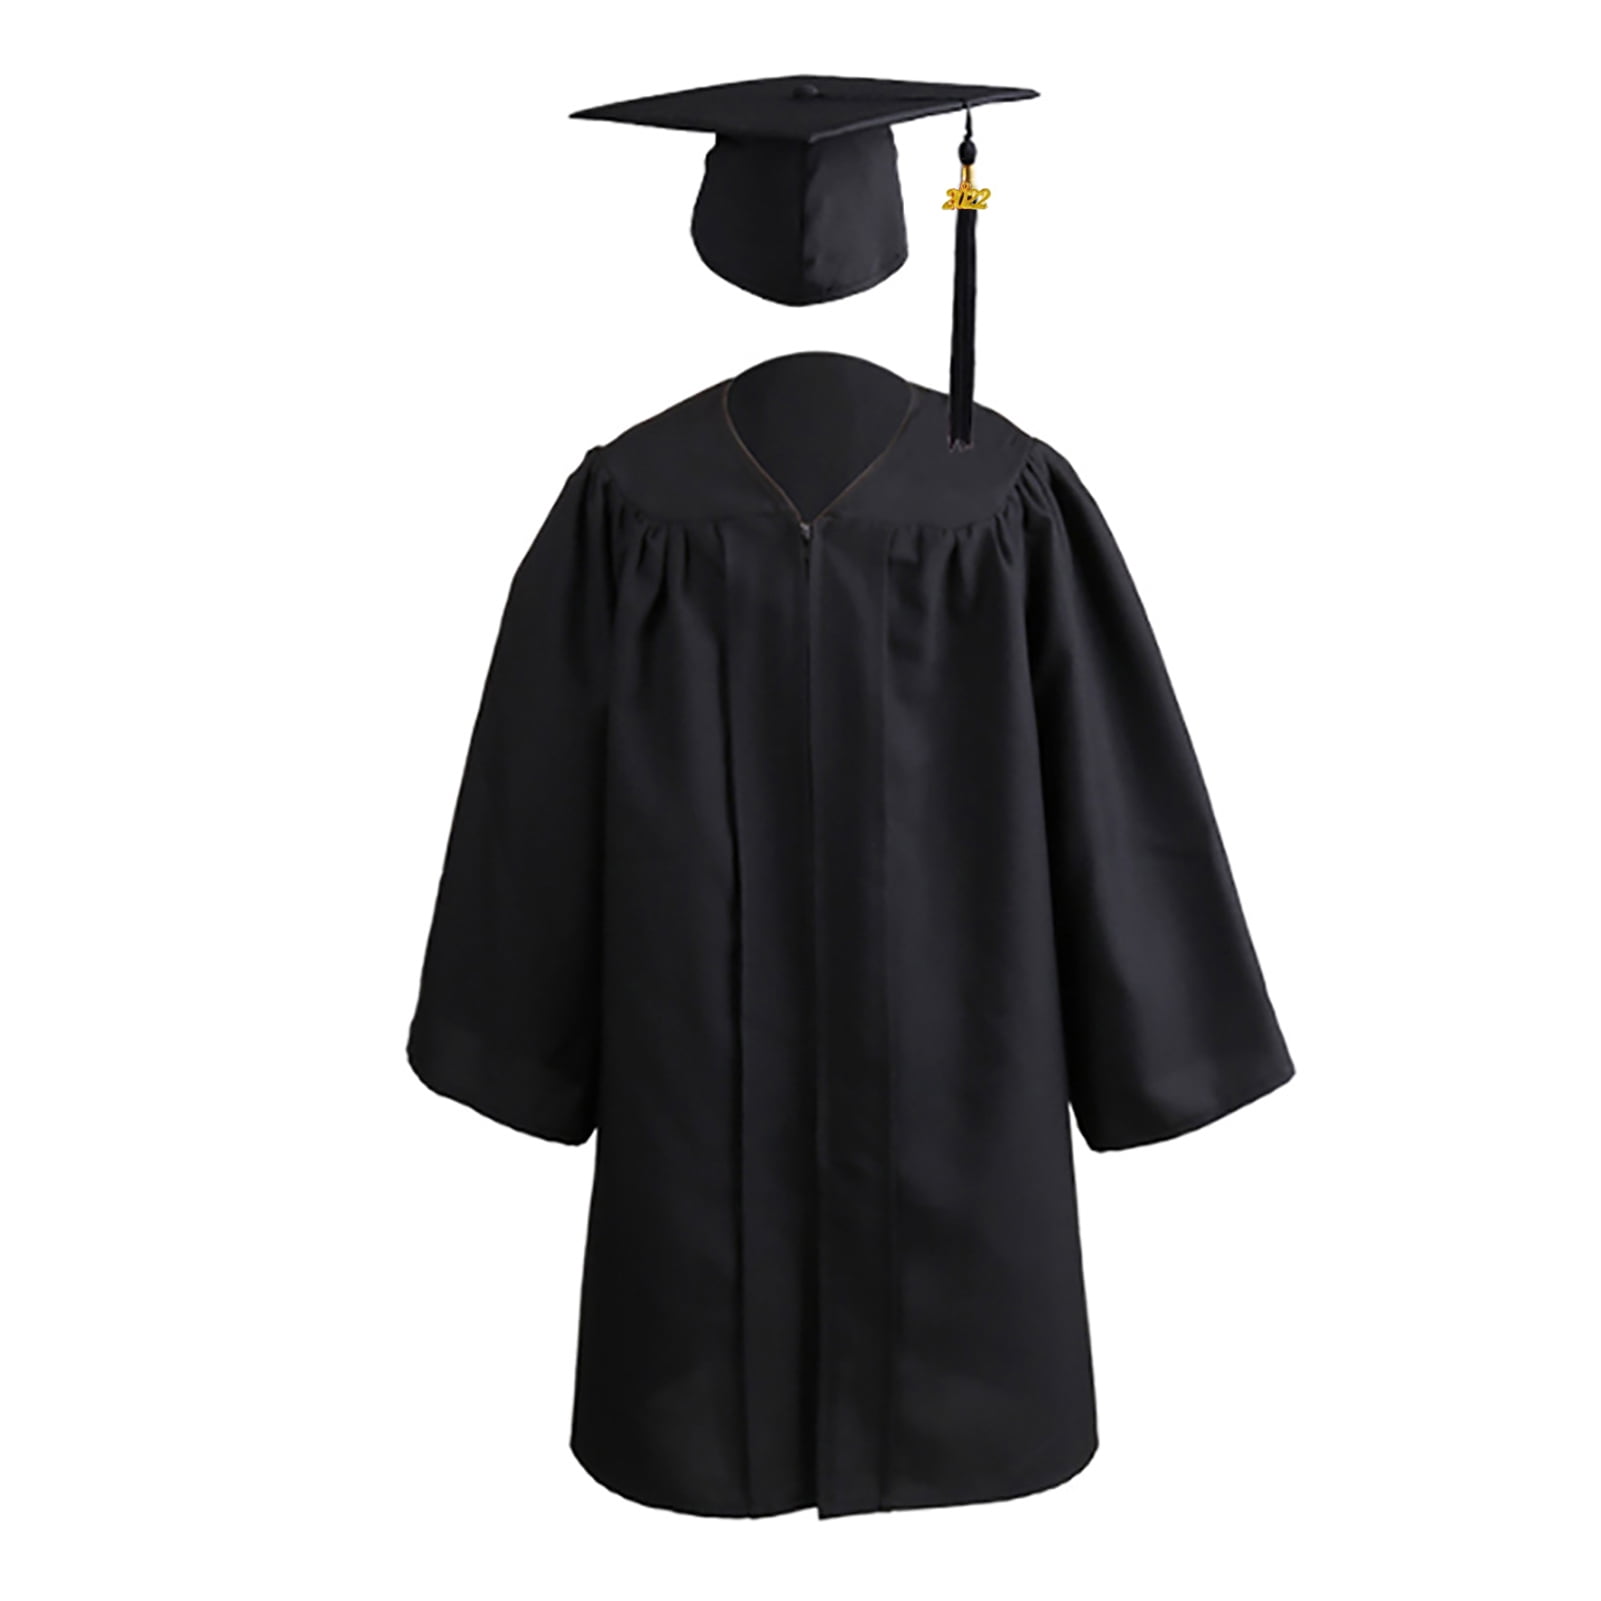 Shopluvonline Unisex Graduation Gown Convocation Gown With Sash Costume ...